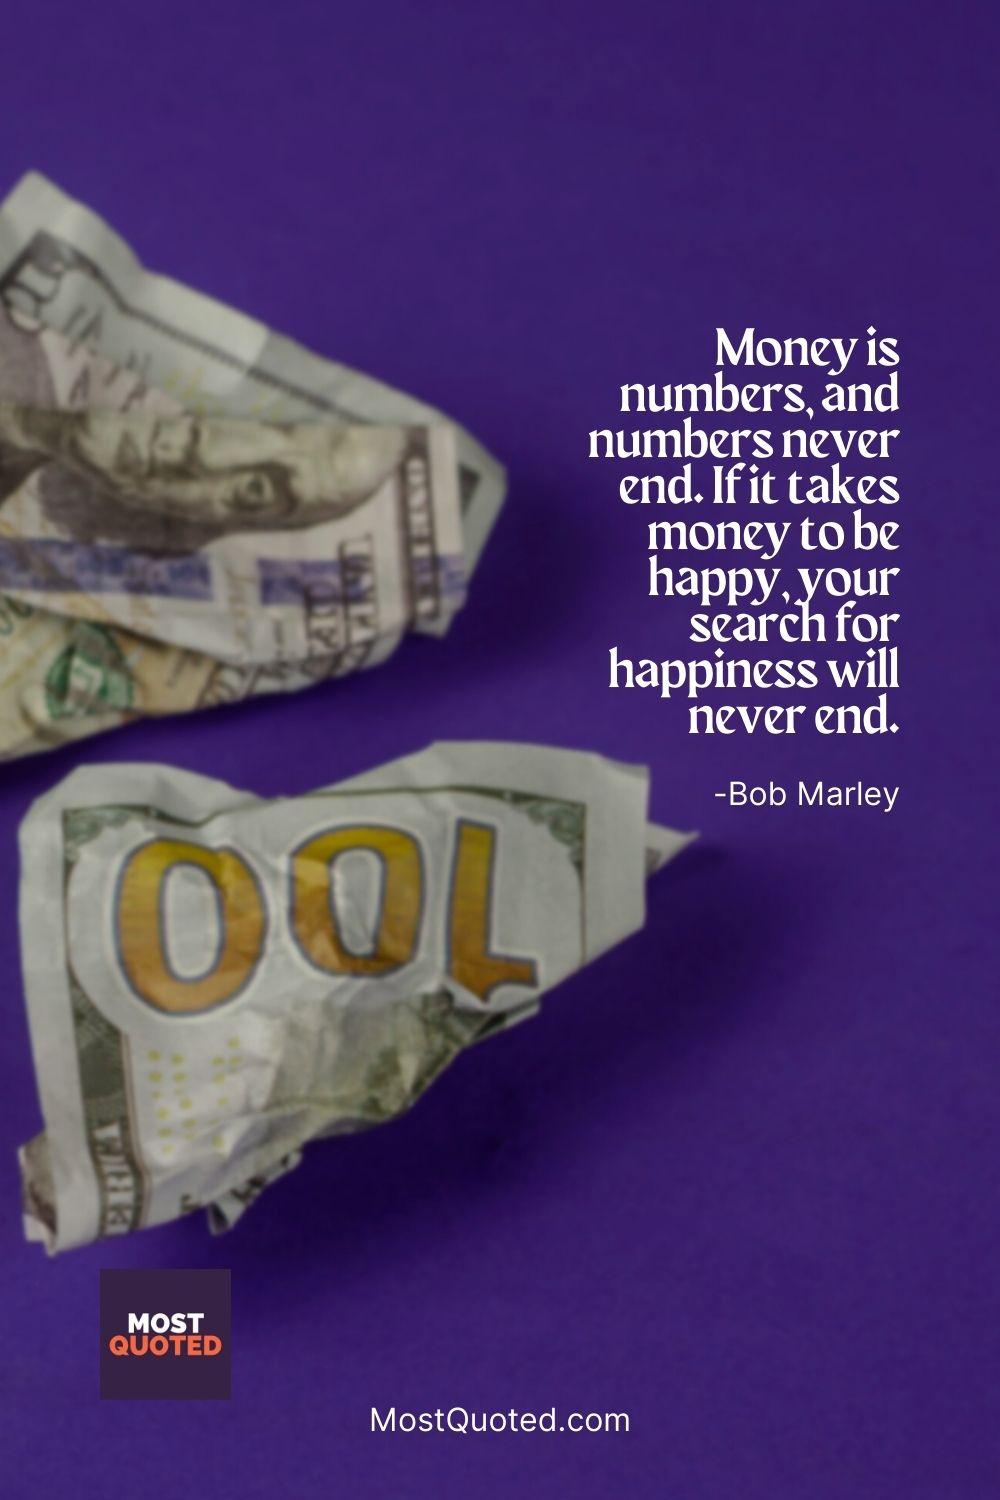 Money is numbers, and numbers never end. If it takes money to be happy, your search for happiness will never end. - Bob Marley